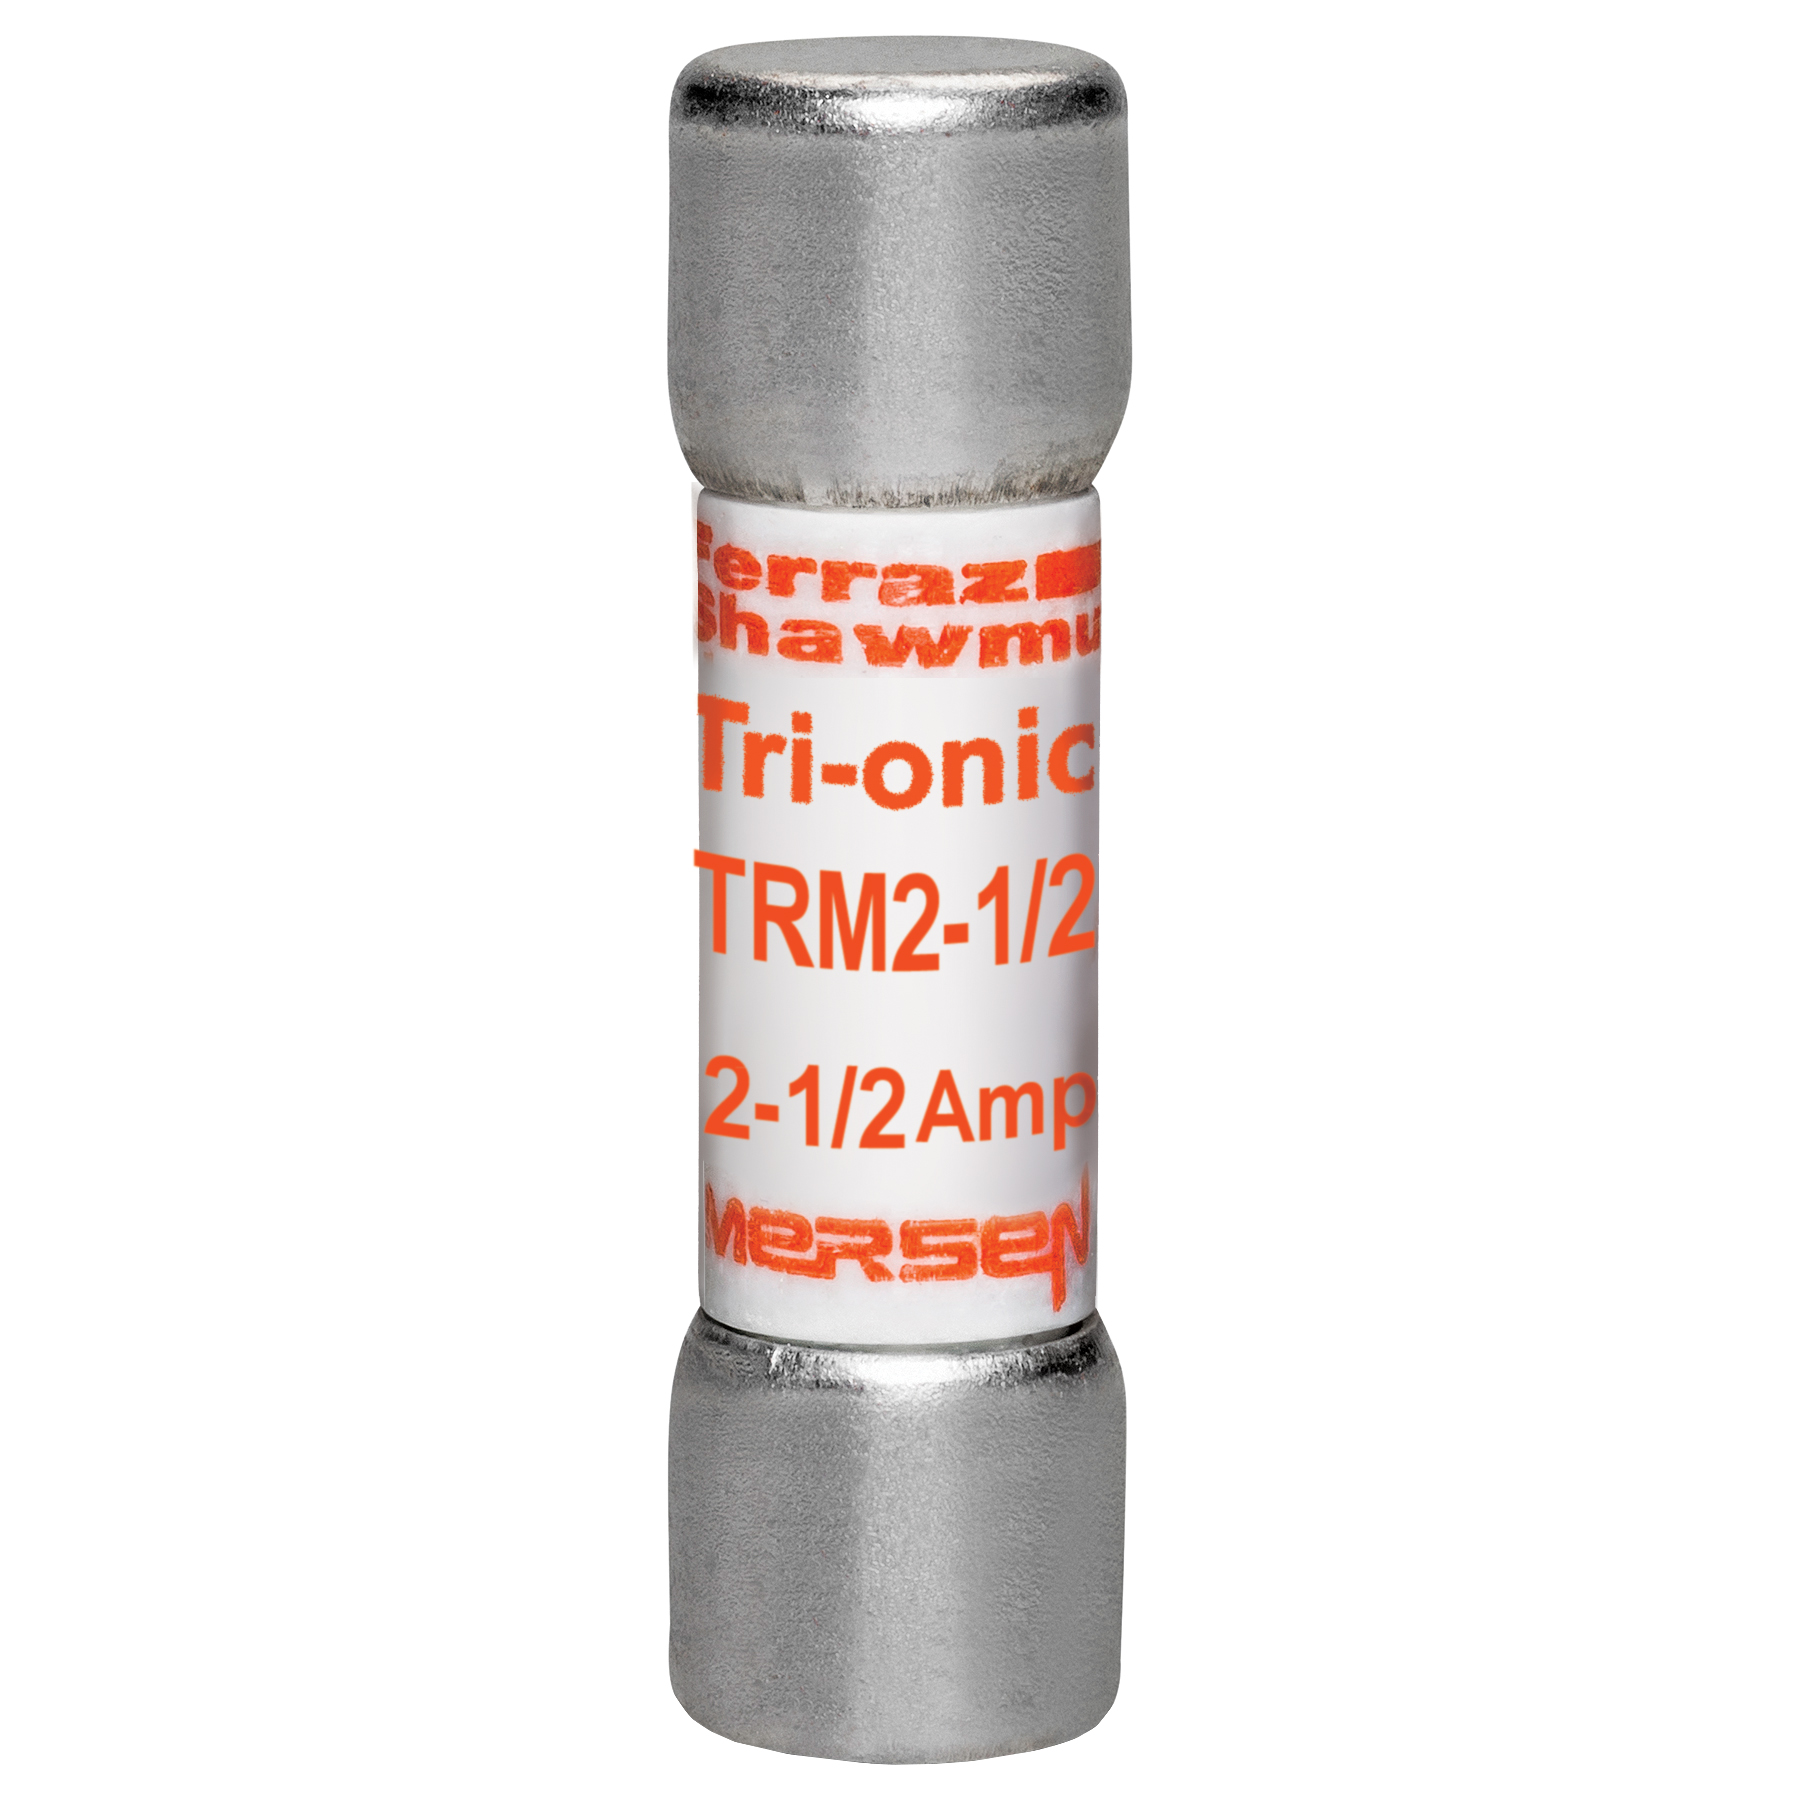 the part number is TRM2-1/2